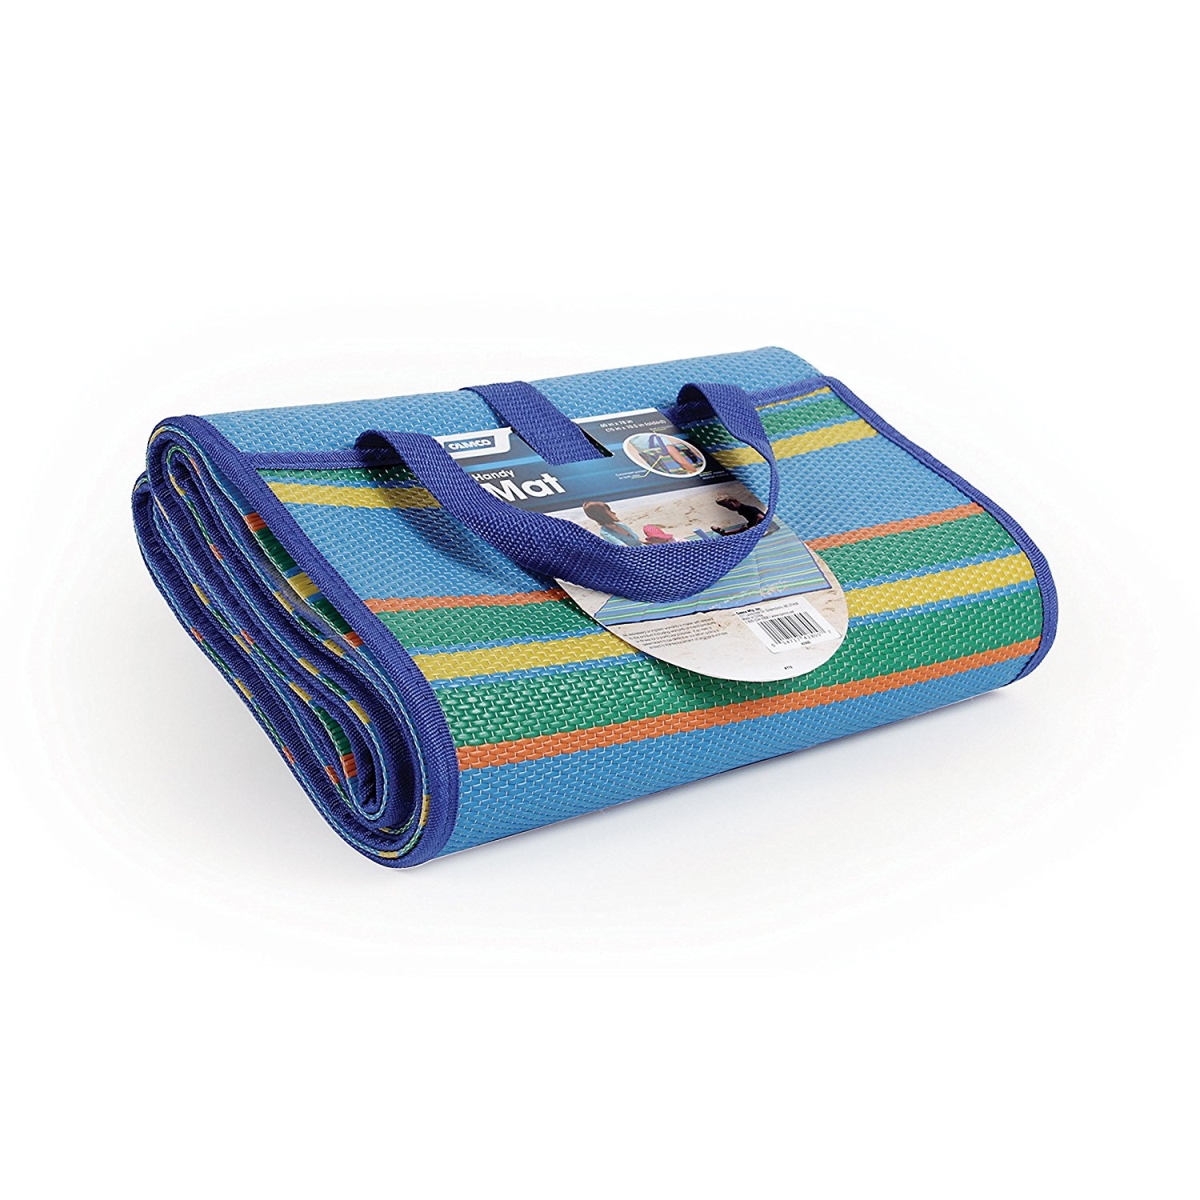 C1w-42814 Striped Handy Mat With Strap - Blue & Green